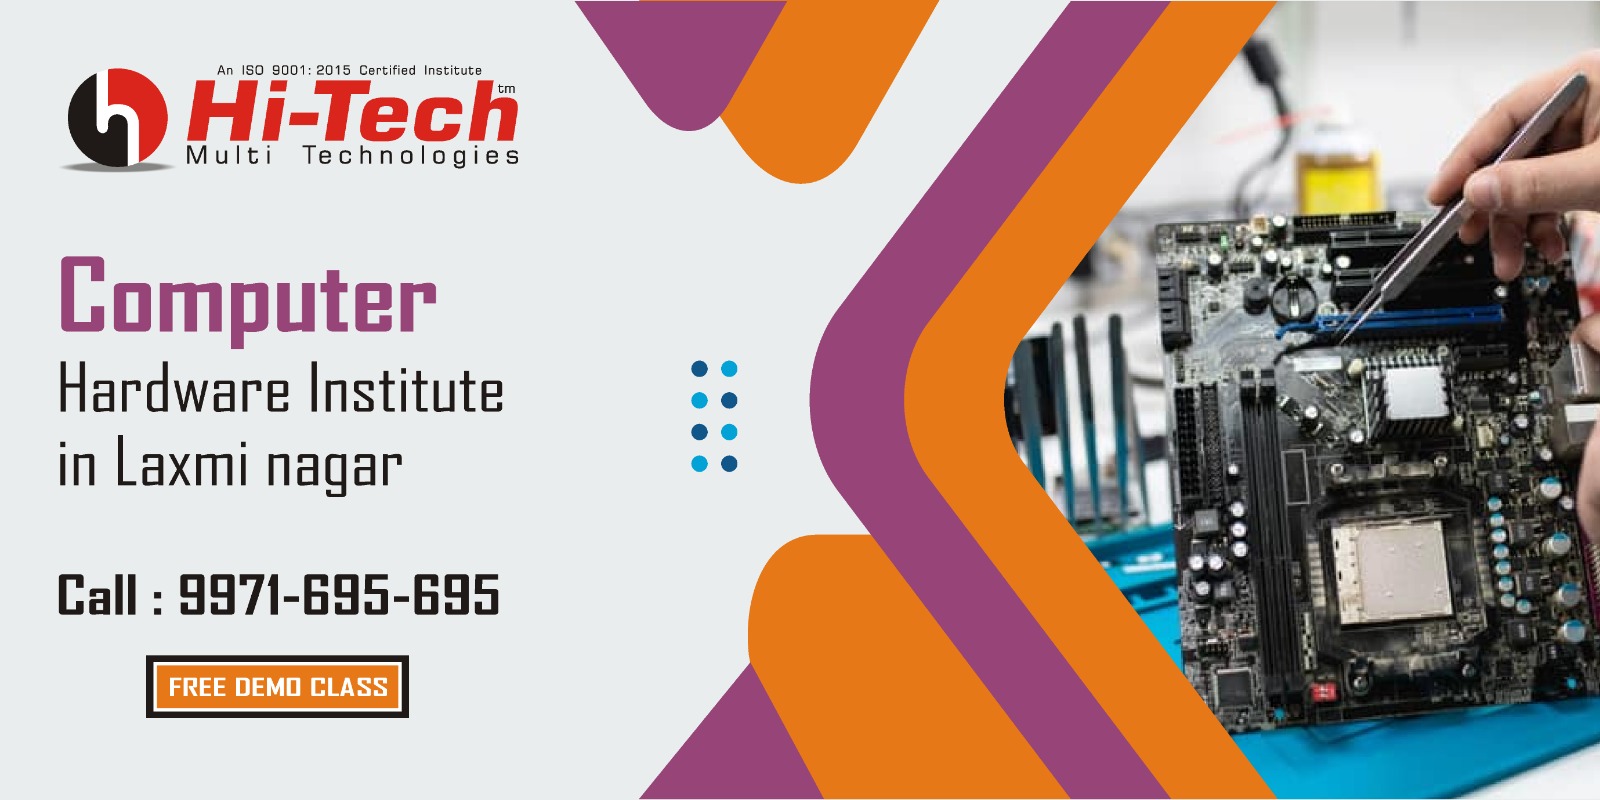 Computer Hardware Course at Hitech Laxmi Nagar: Empowering Students with Practical Knowledge